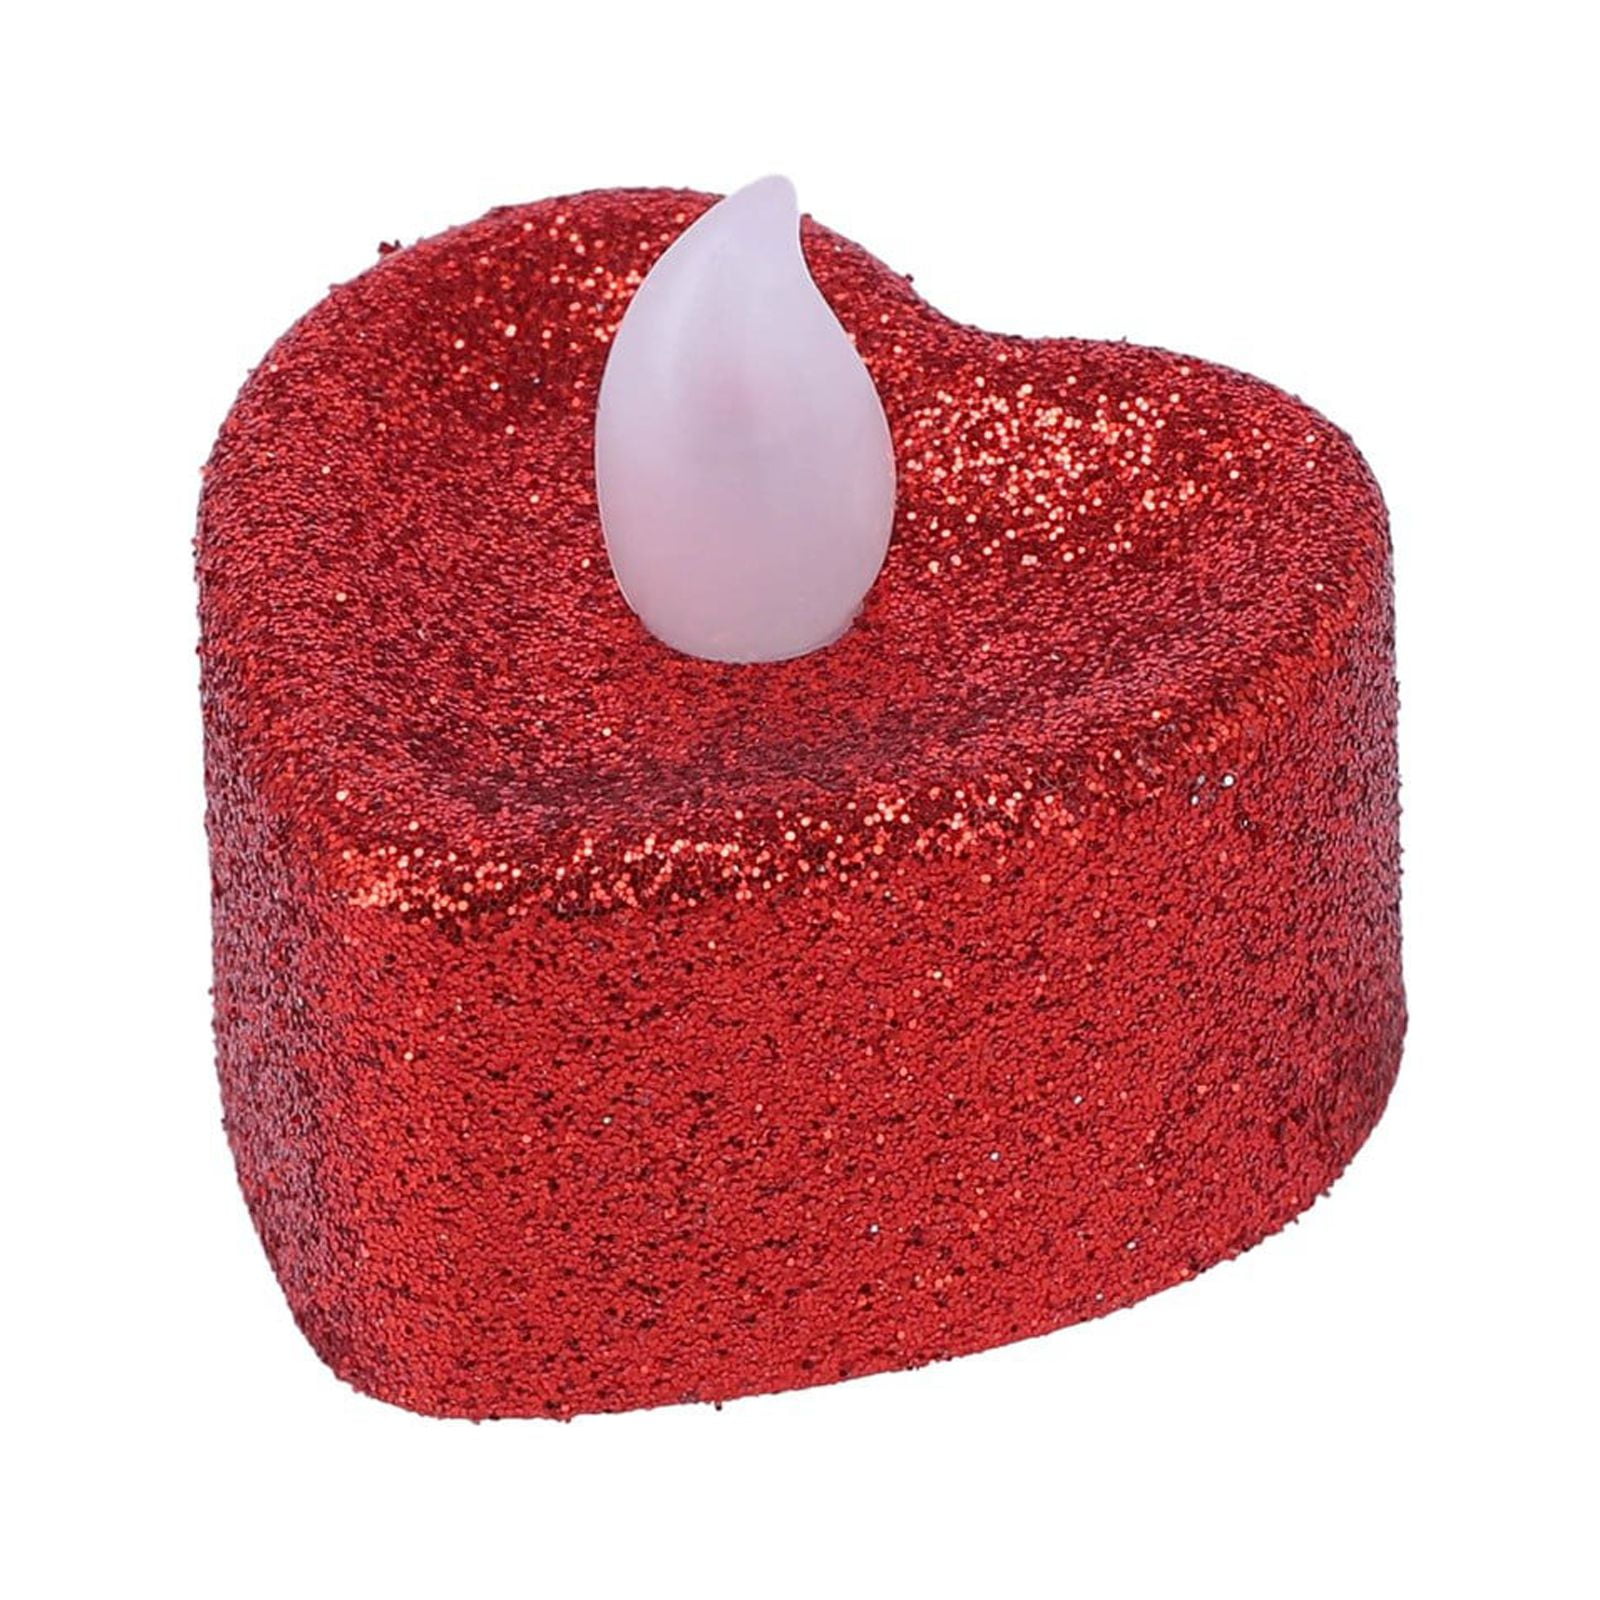 Diy Low Budget Glitter Tea Light Candles for Valentines Day